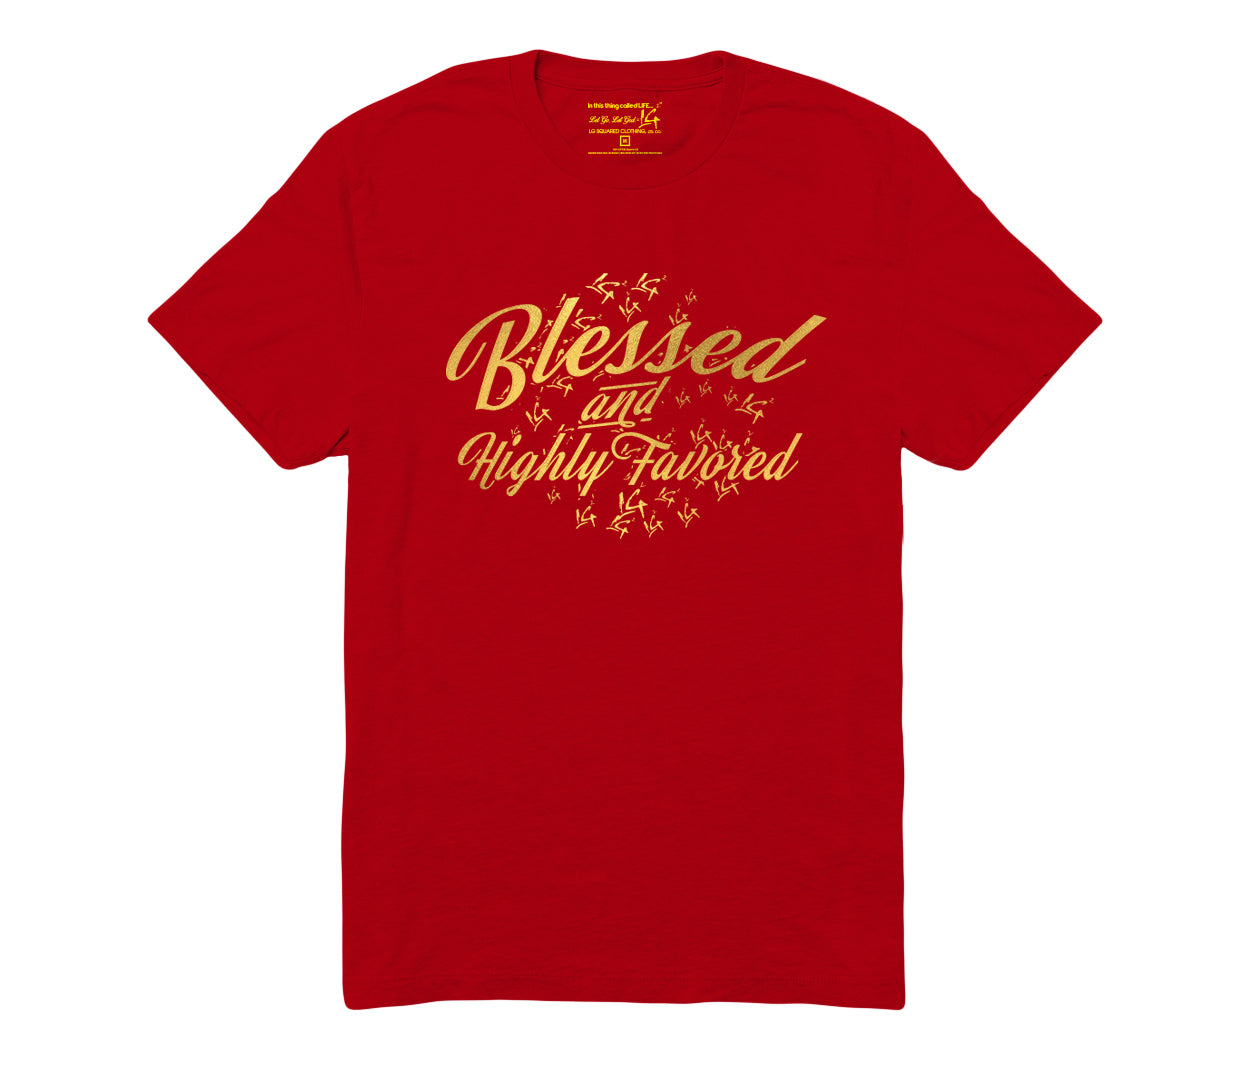 The Blessed & Highly Favored Tee